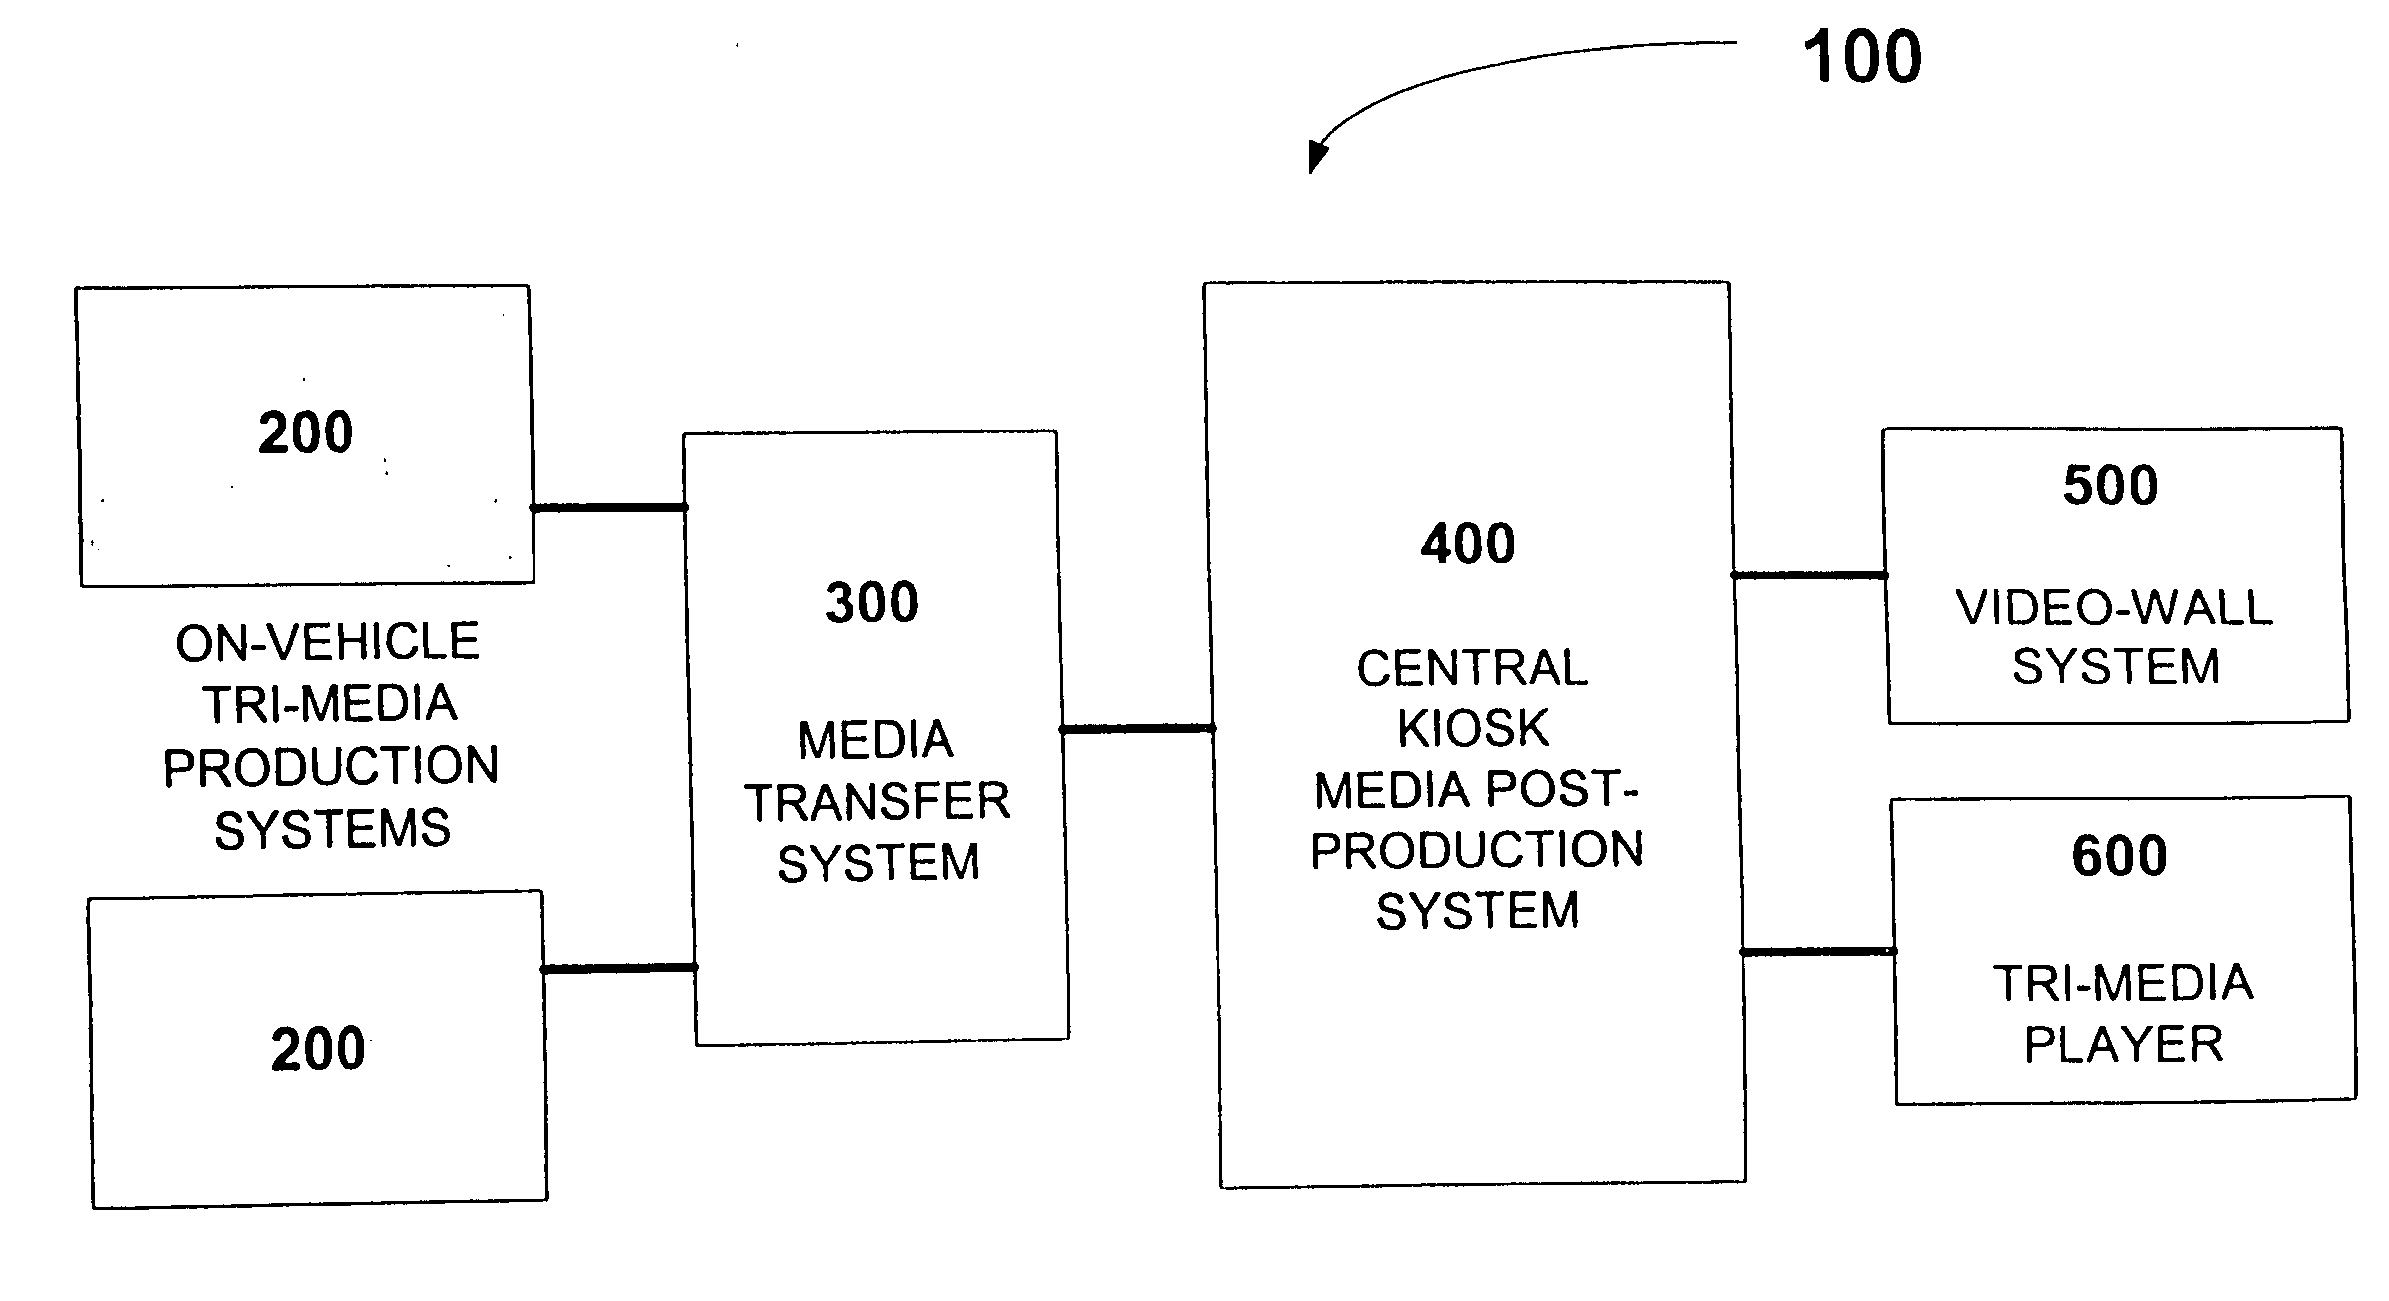 Multimedia racing experience system and corresponding experience based displays